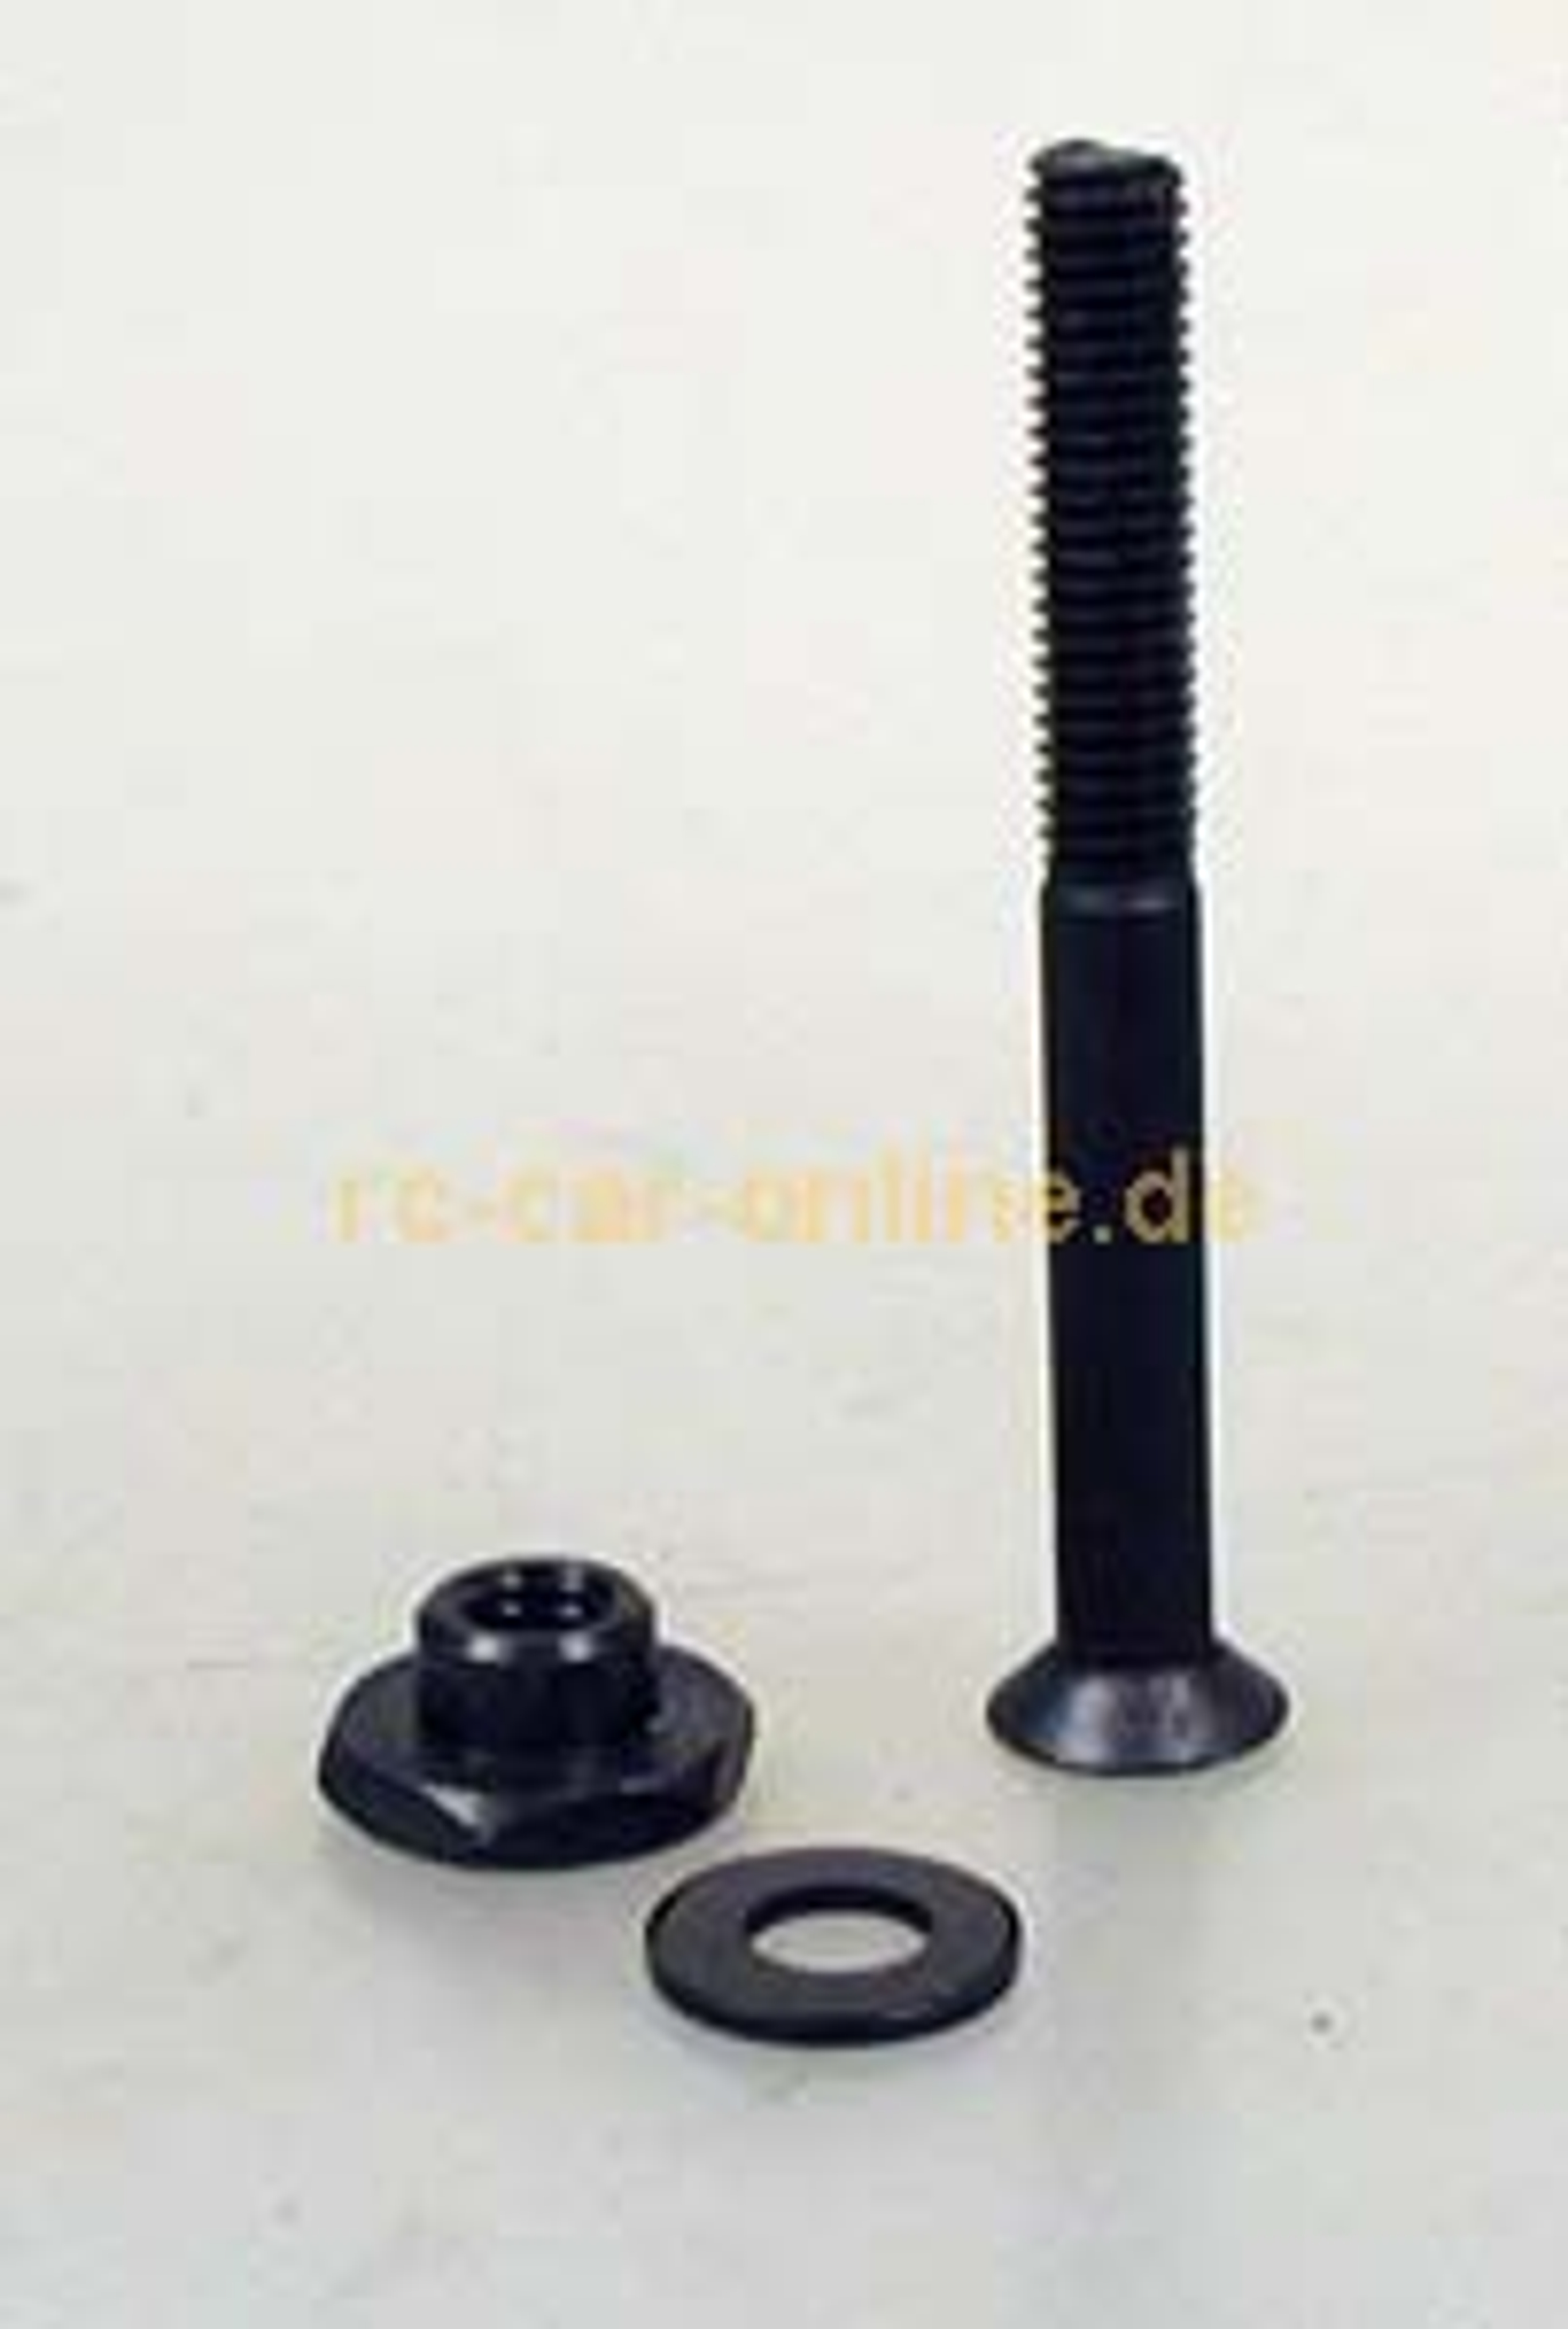 8412/08 FG Guiding nut with M4 countersunk head - 1pce.